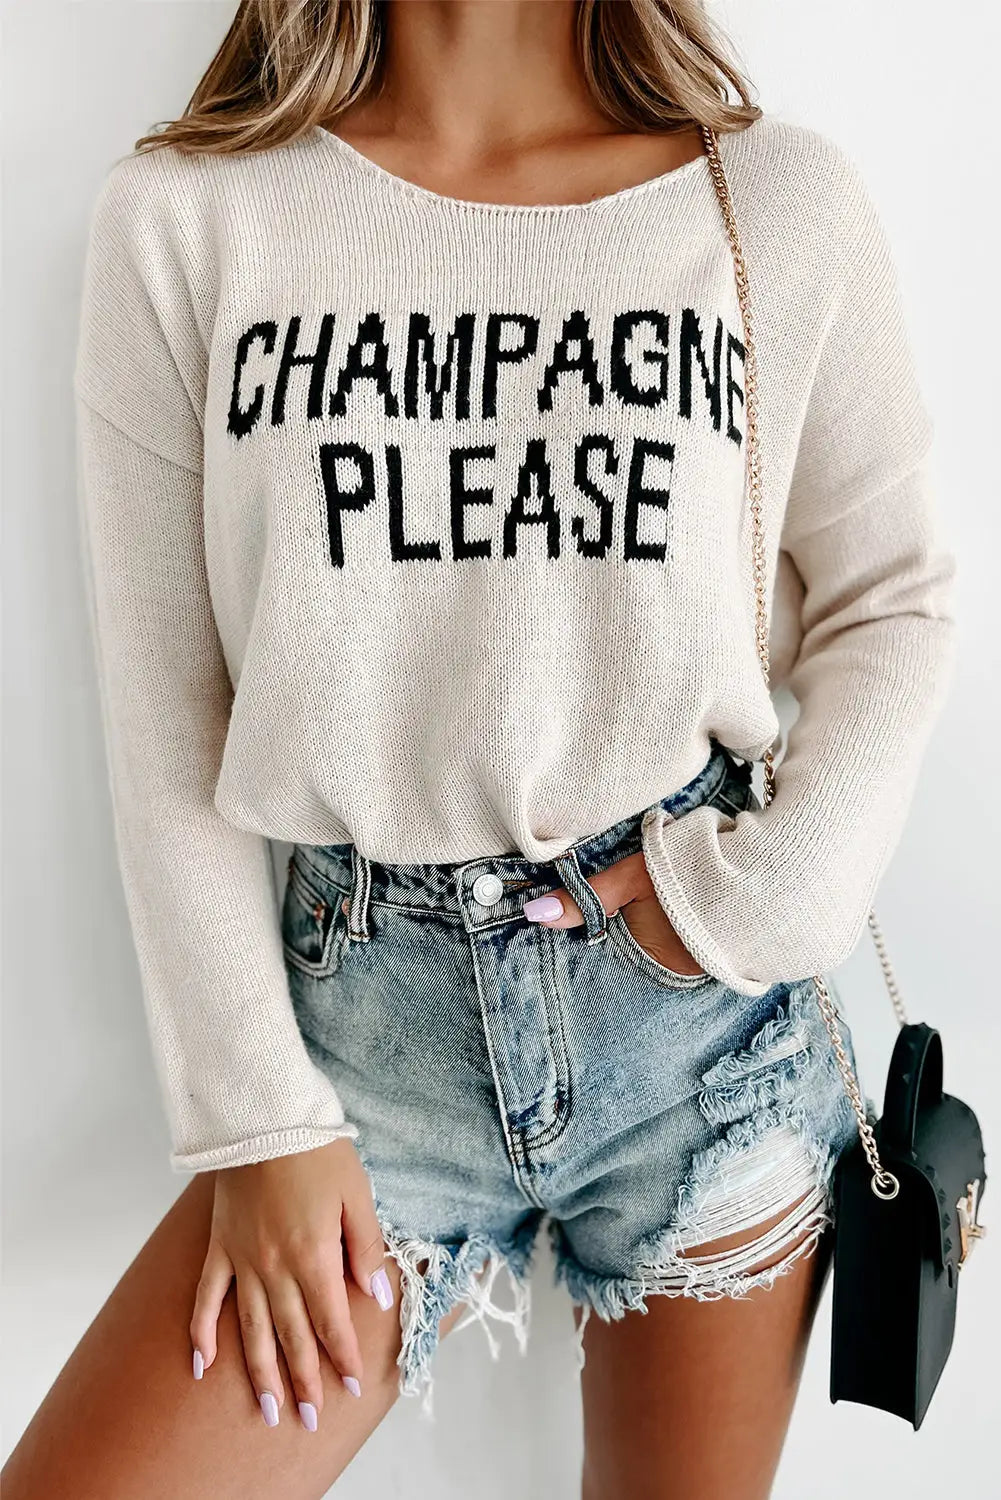 Desert palm champagne please graphic sweater - snow white / l / 100% cotton - sweaters & cardigans